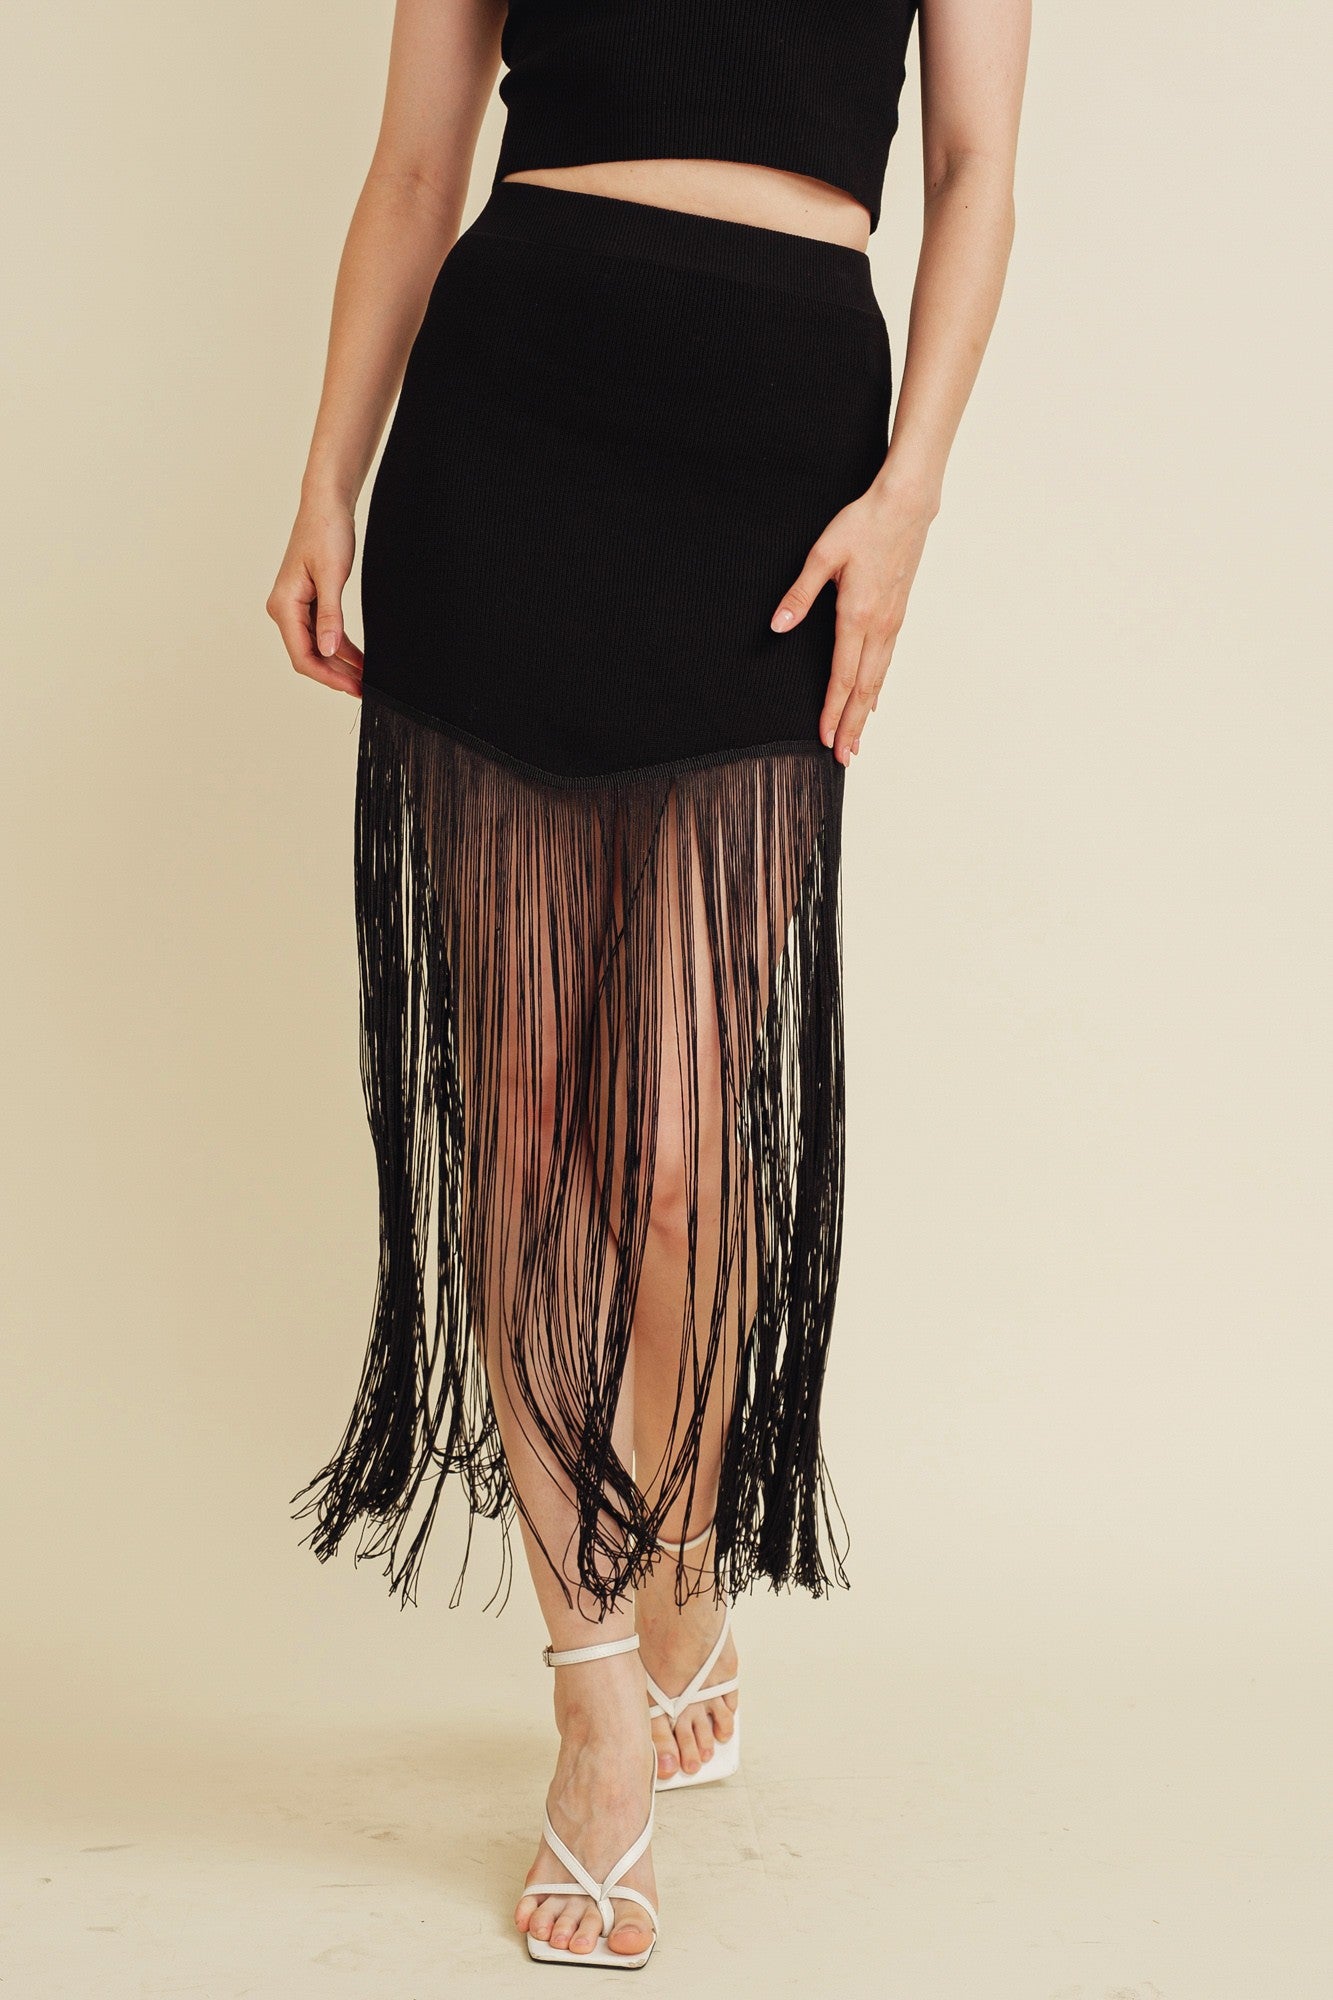 Sleeveless knit top and midi skirt in black with fringe detailing.  Bottom view.